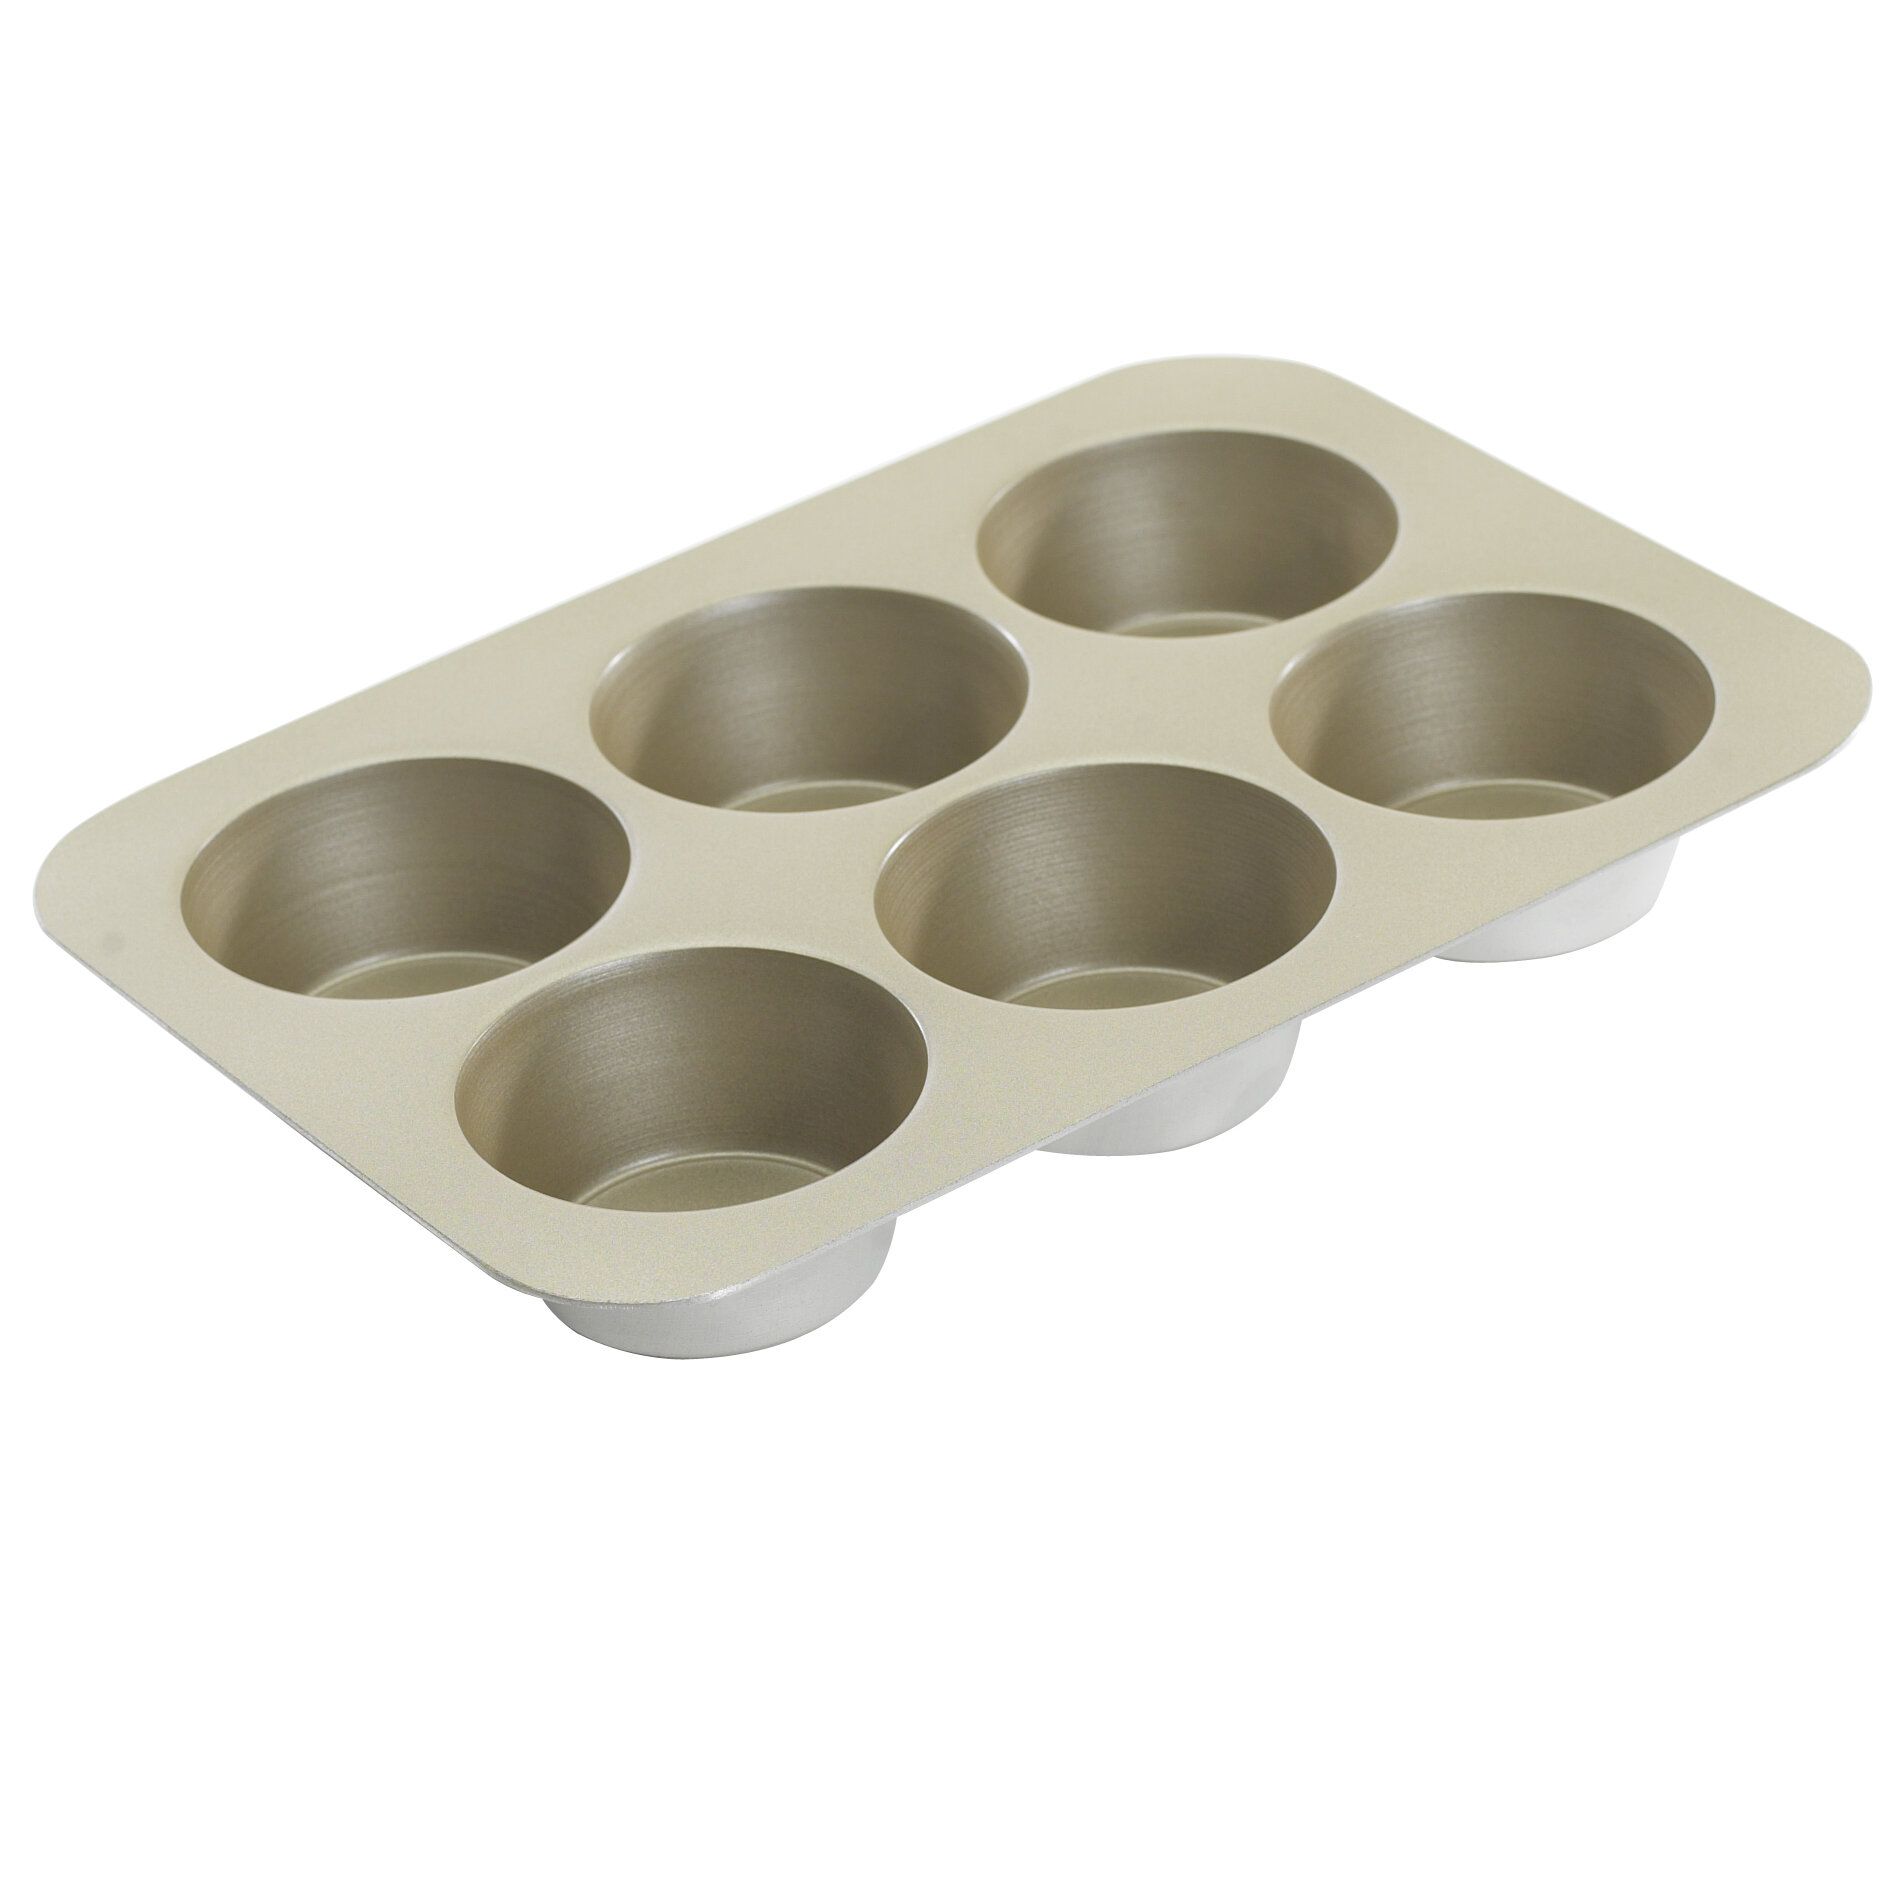  Nordic Ware Compact Ovenware Muffin Pan: Toaster Ovens